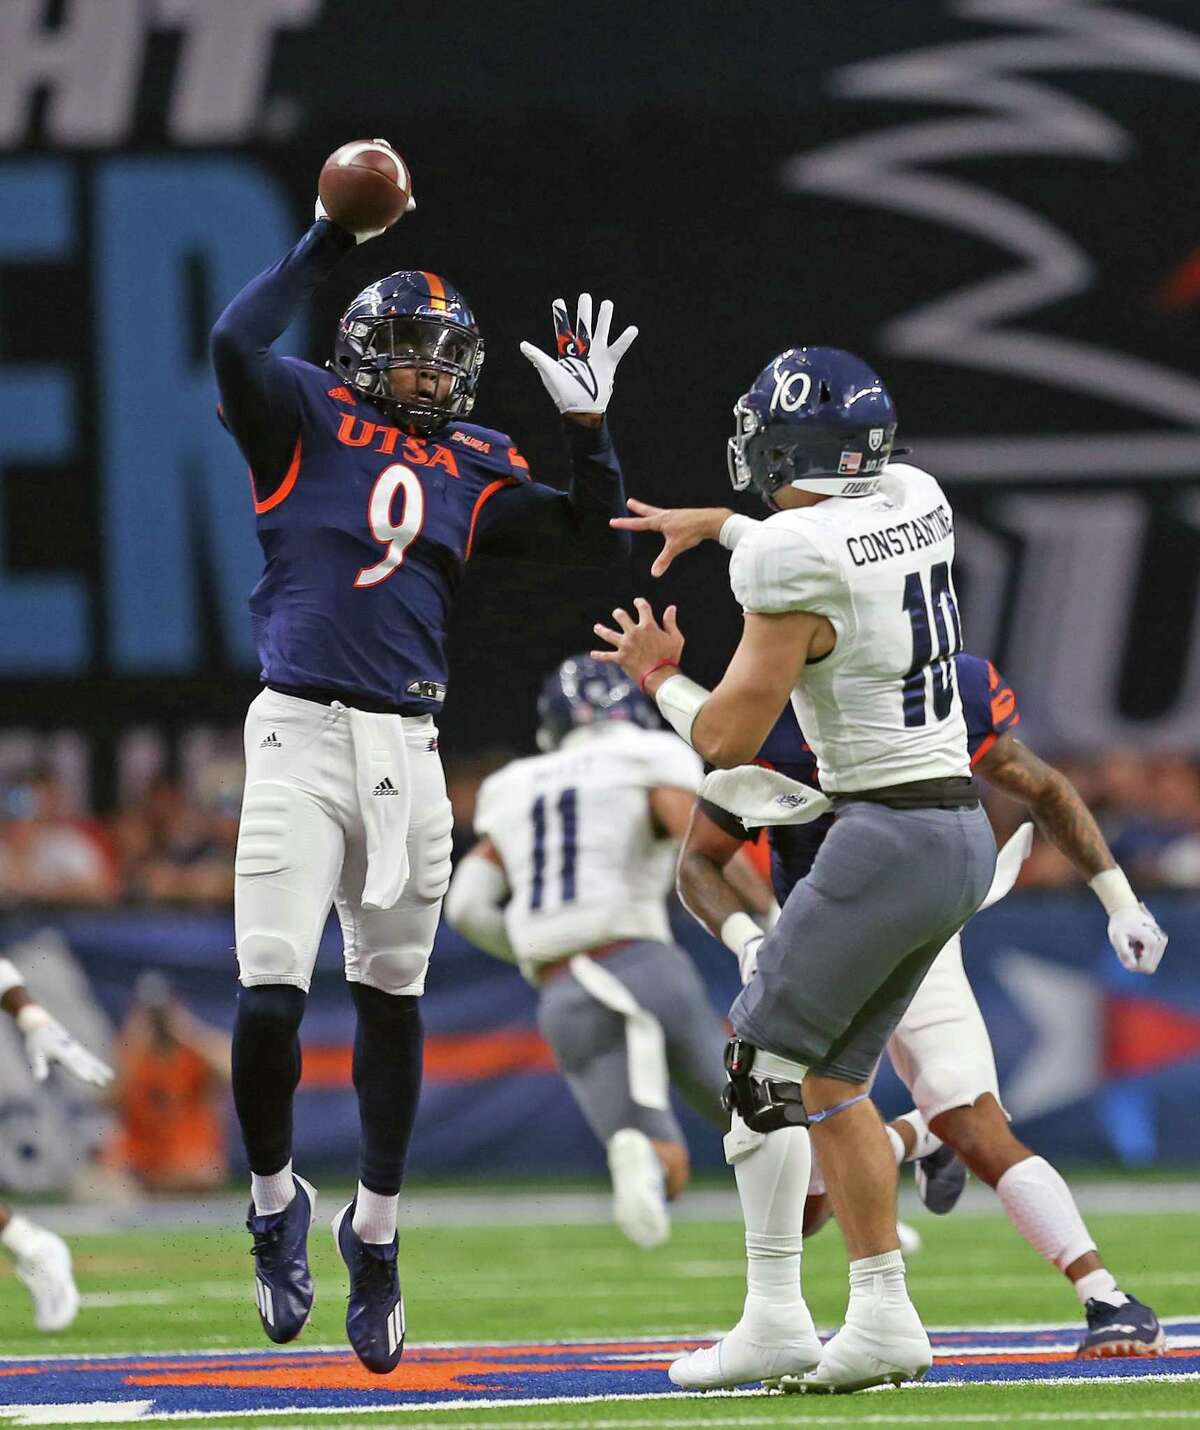 UTSA linebacker Clarence Hicks defects a pass into the arms Trevor Harmanson (not in frame) who ran it in for a touchdown on Saturday, Oct. 16, 2021 at the Alamodome.